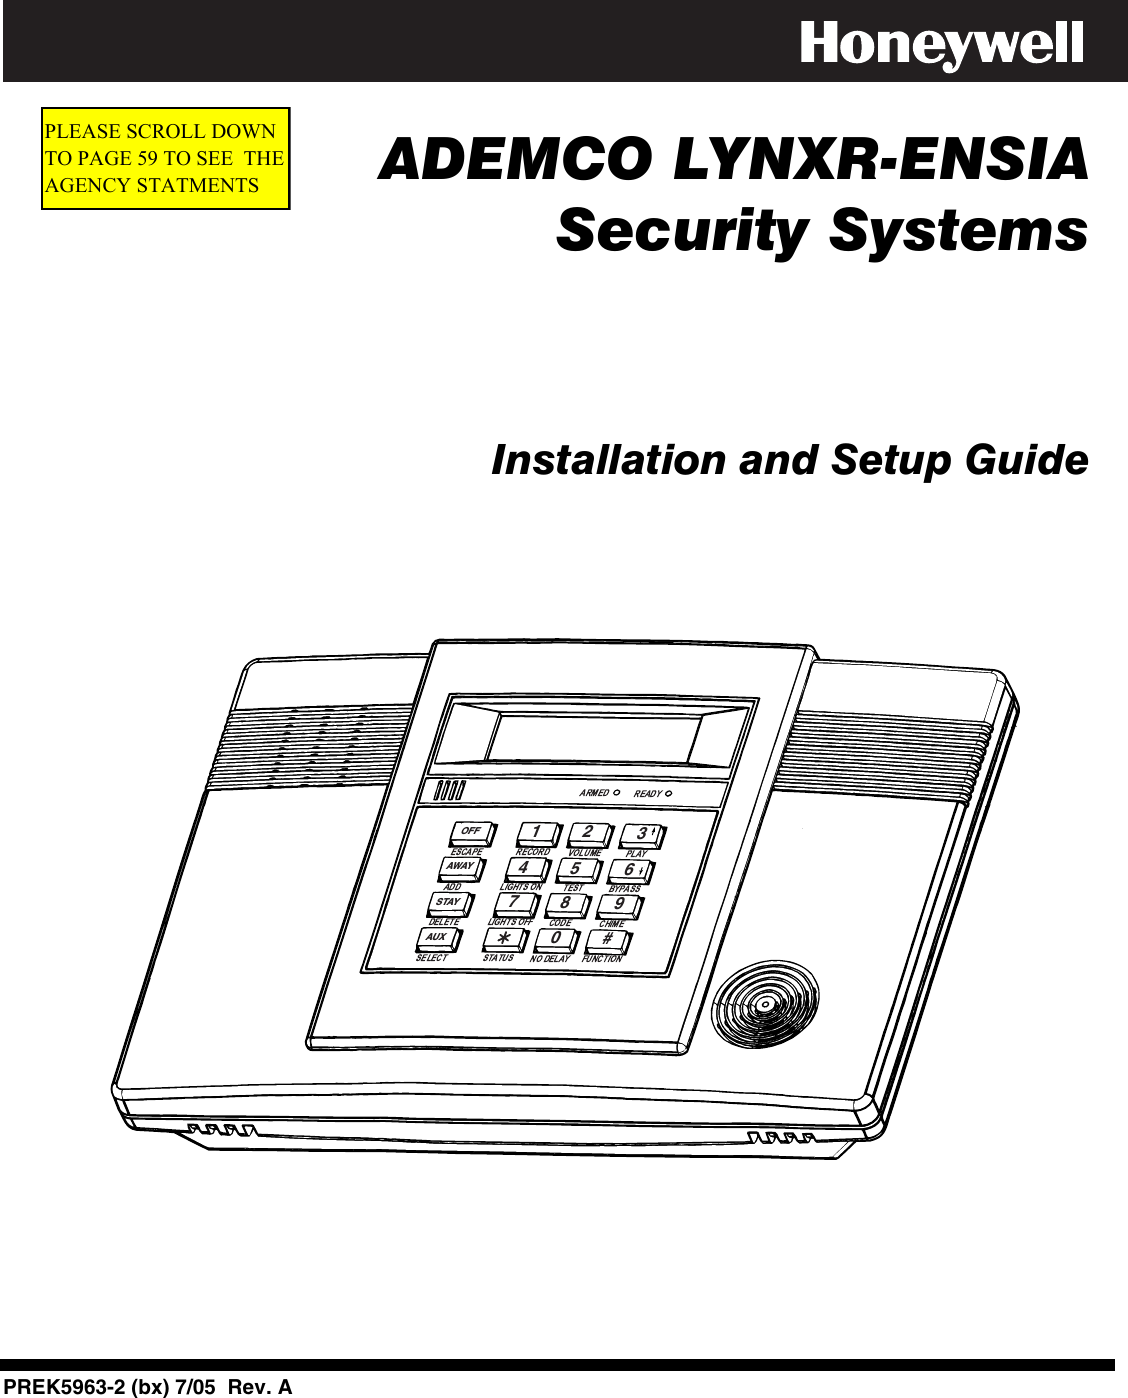       ADEMCO LYNXR-ENSIA   Security Systems          Installation and Setup Guide      AWAYOFFSTAYAUX4567890#123          PREK5963-2 (bx) 7/05  Rev. APLEASE SCROLL DOWNTO PAGE 59 TO SEE  THE AGENCY STATMENTS